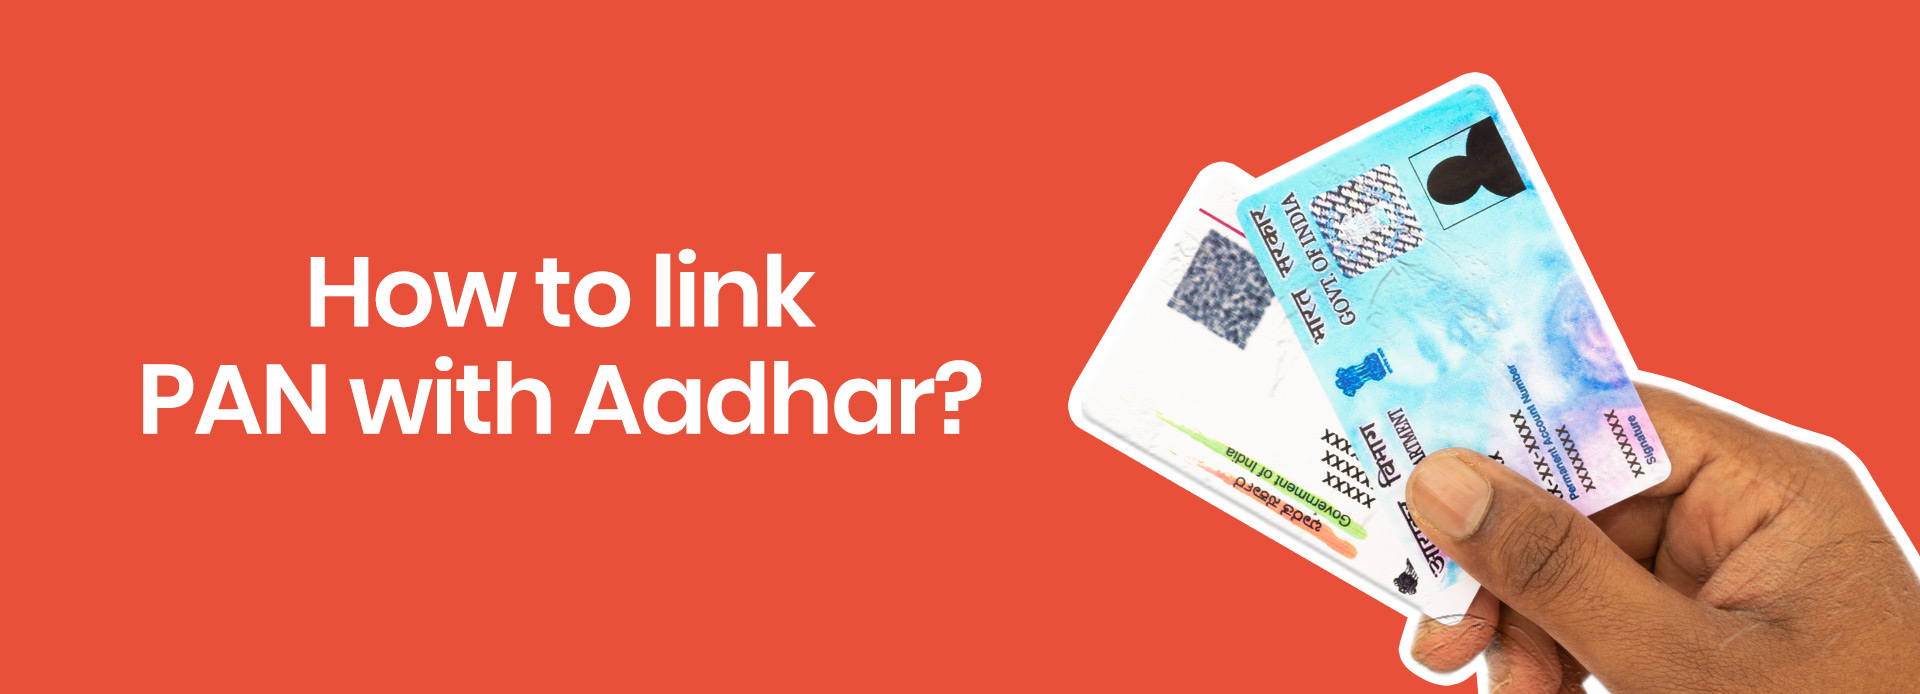 A Step-by-Step Guide on How to Link PAN with Aadhaar